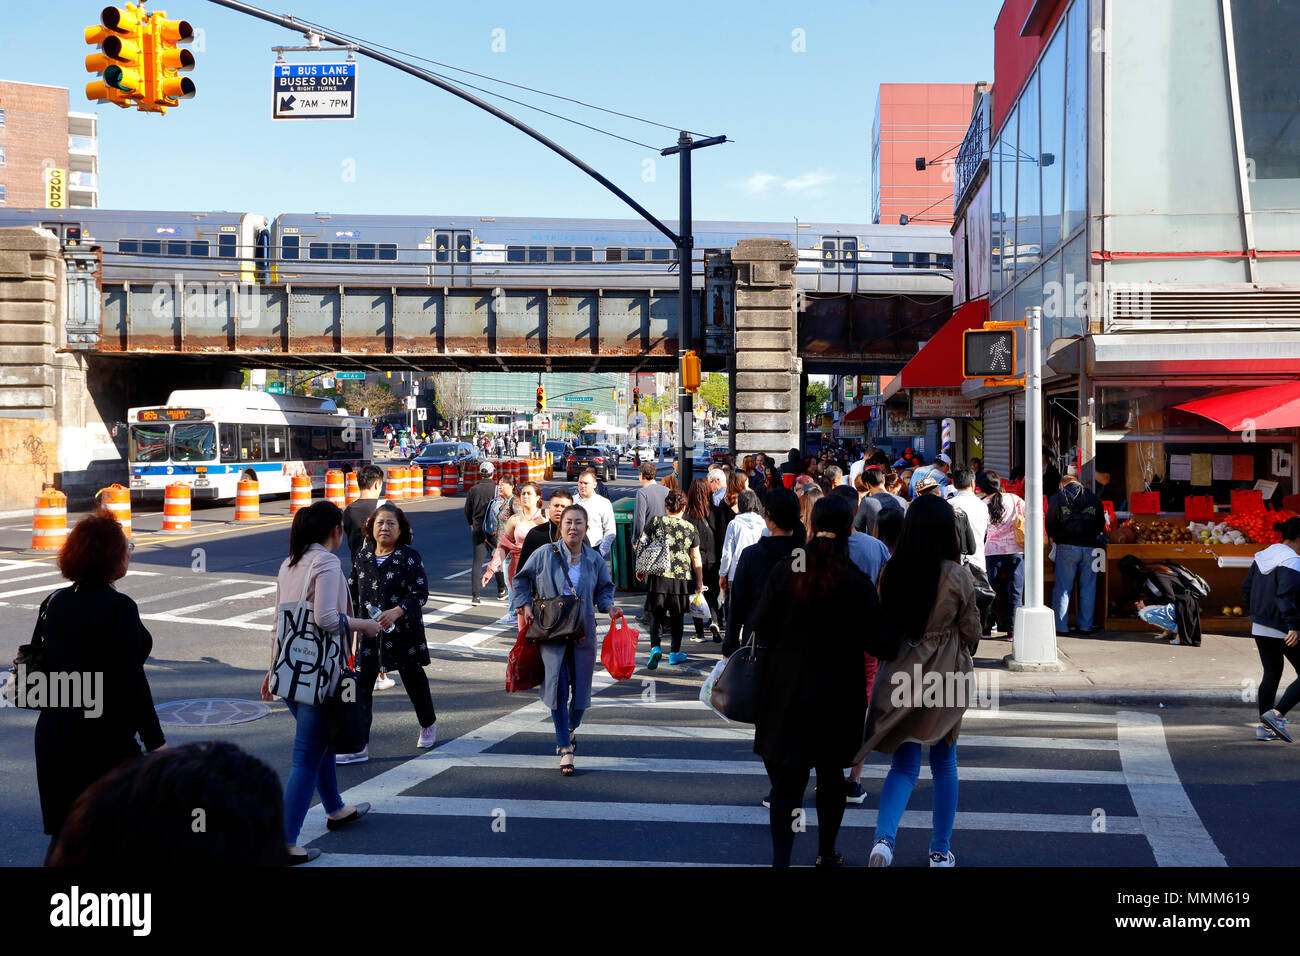 People crossing the street in Downtown Flushing in Queens, New York, NY. in the background, train and bus traffic, May 2018. 法拉盛, 法拉盛華埠, 華裔美國人, 紐約 Stock Photo